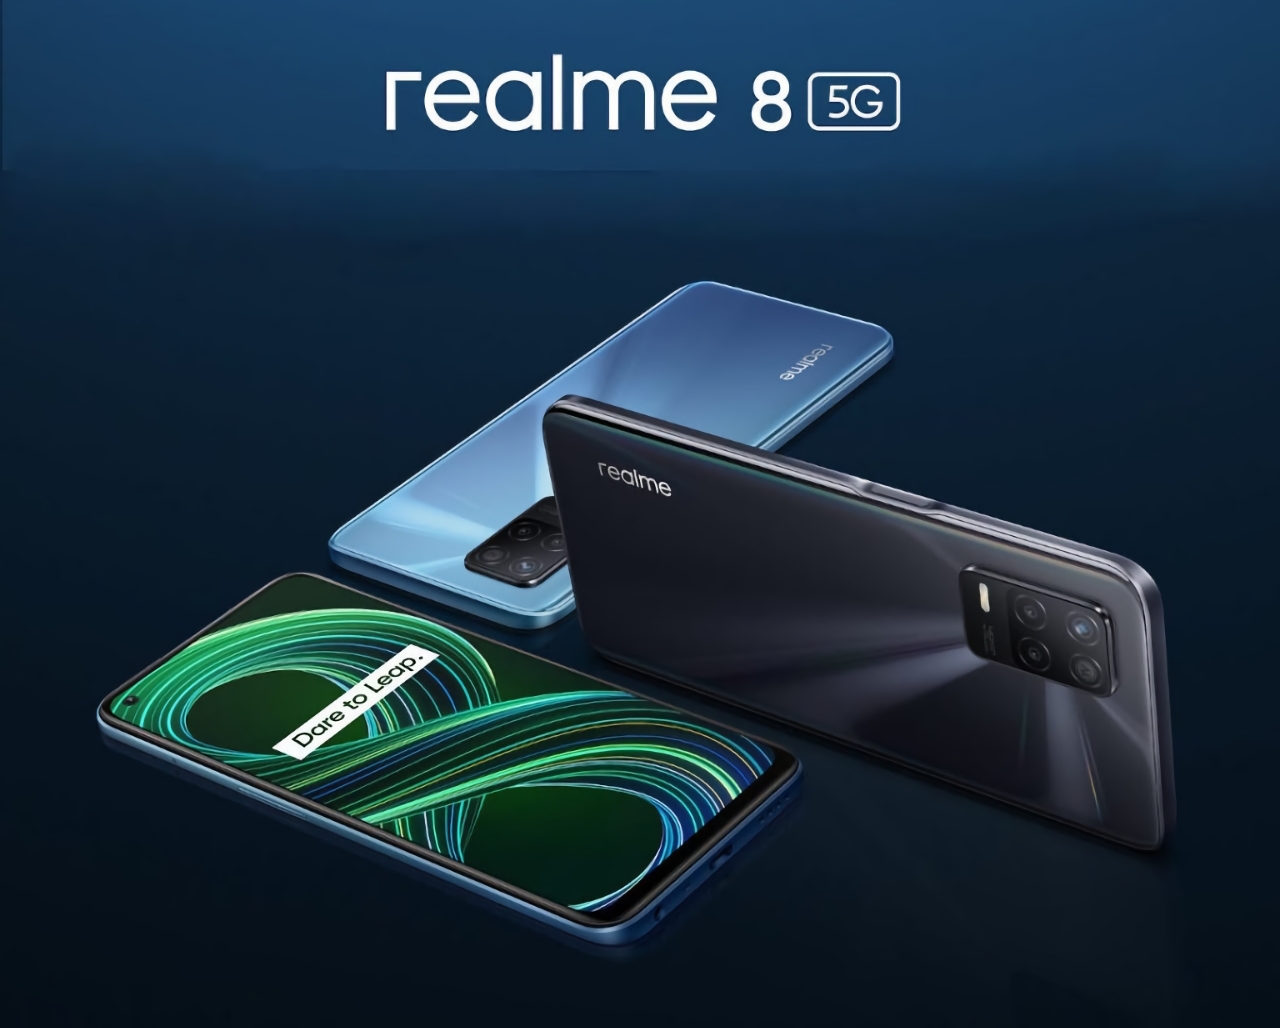 Official: Realme 8 5G with MediaTek Dimensity 700 chip will debut on April 21